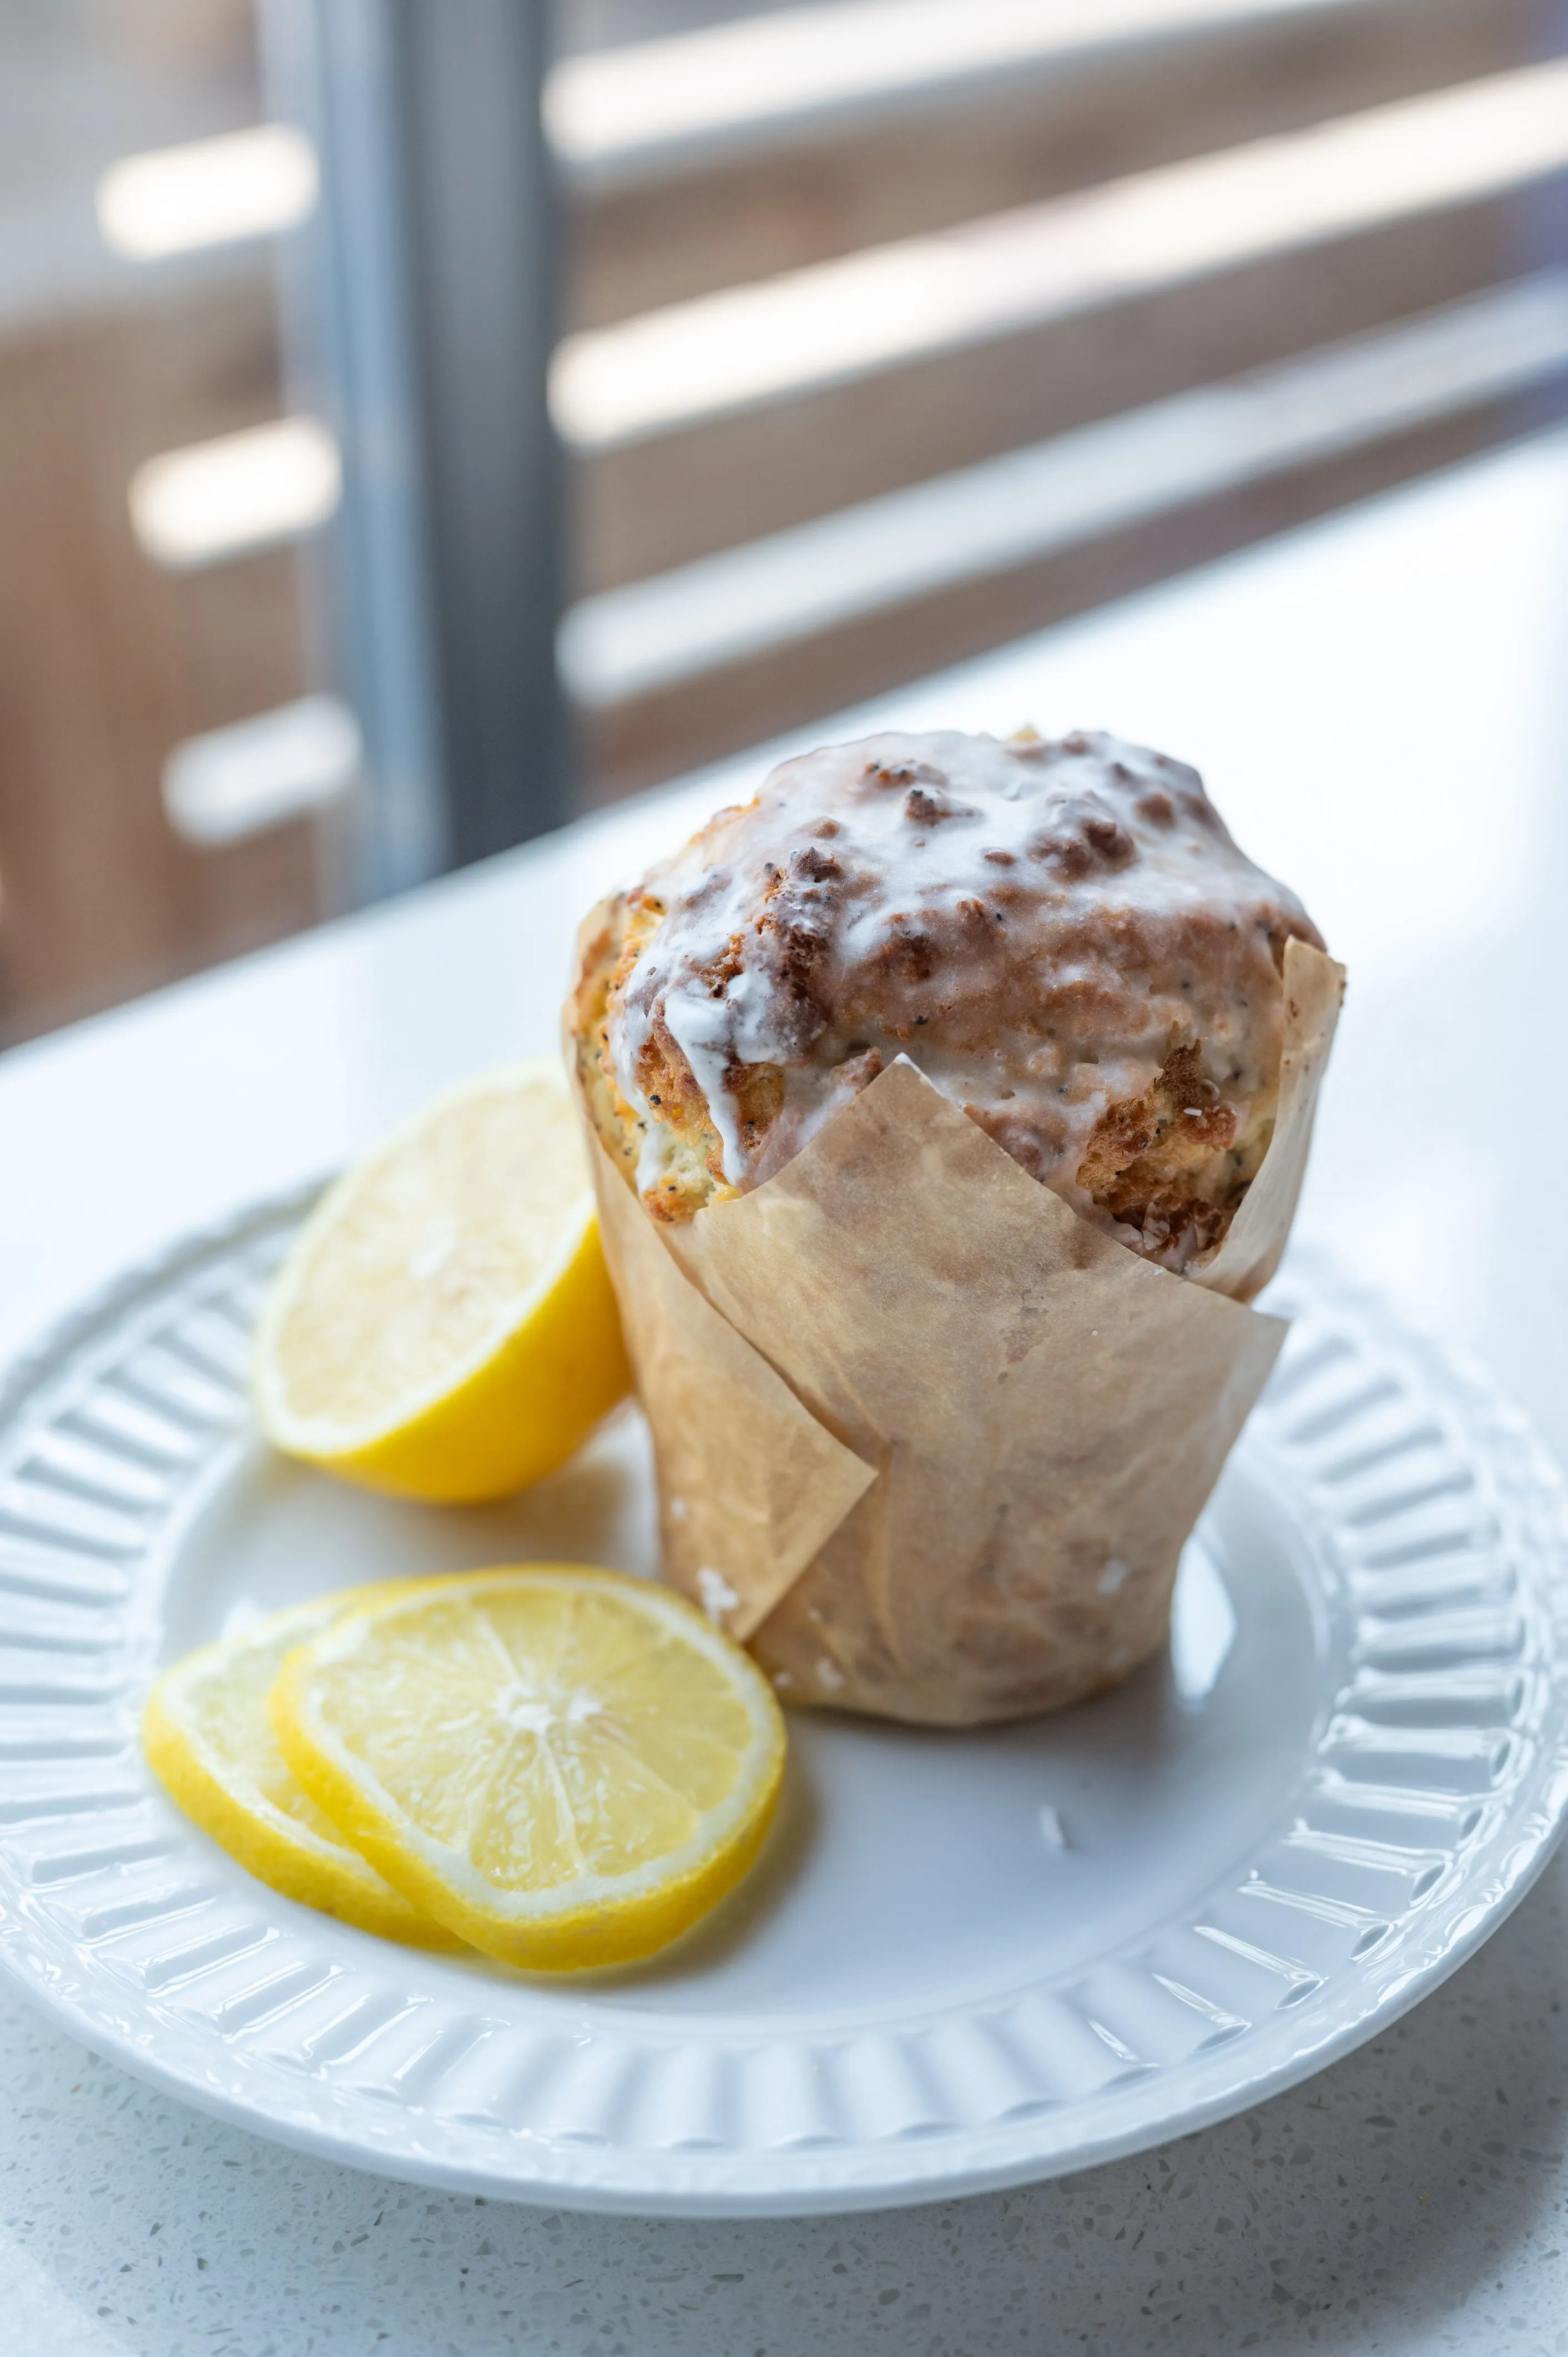 Lemon poppy seed muffin with a glazed top on a white plate with lemon slices, near a sunlit window.